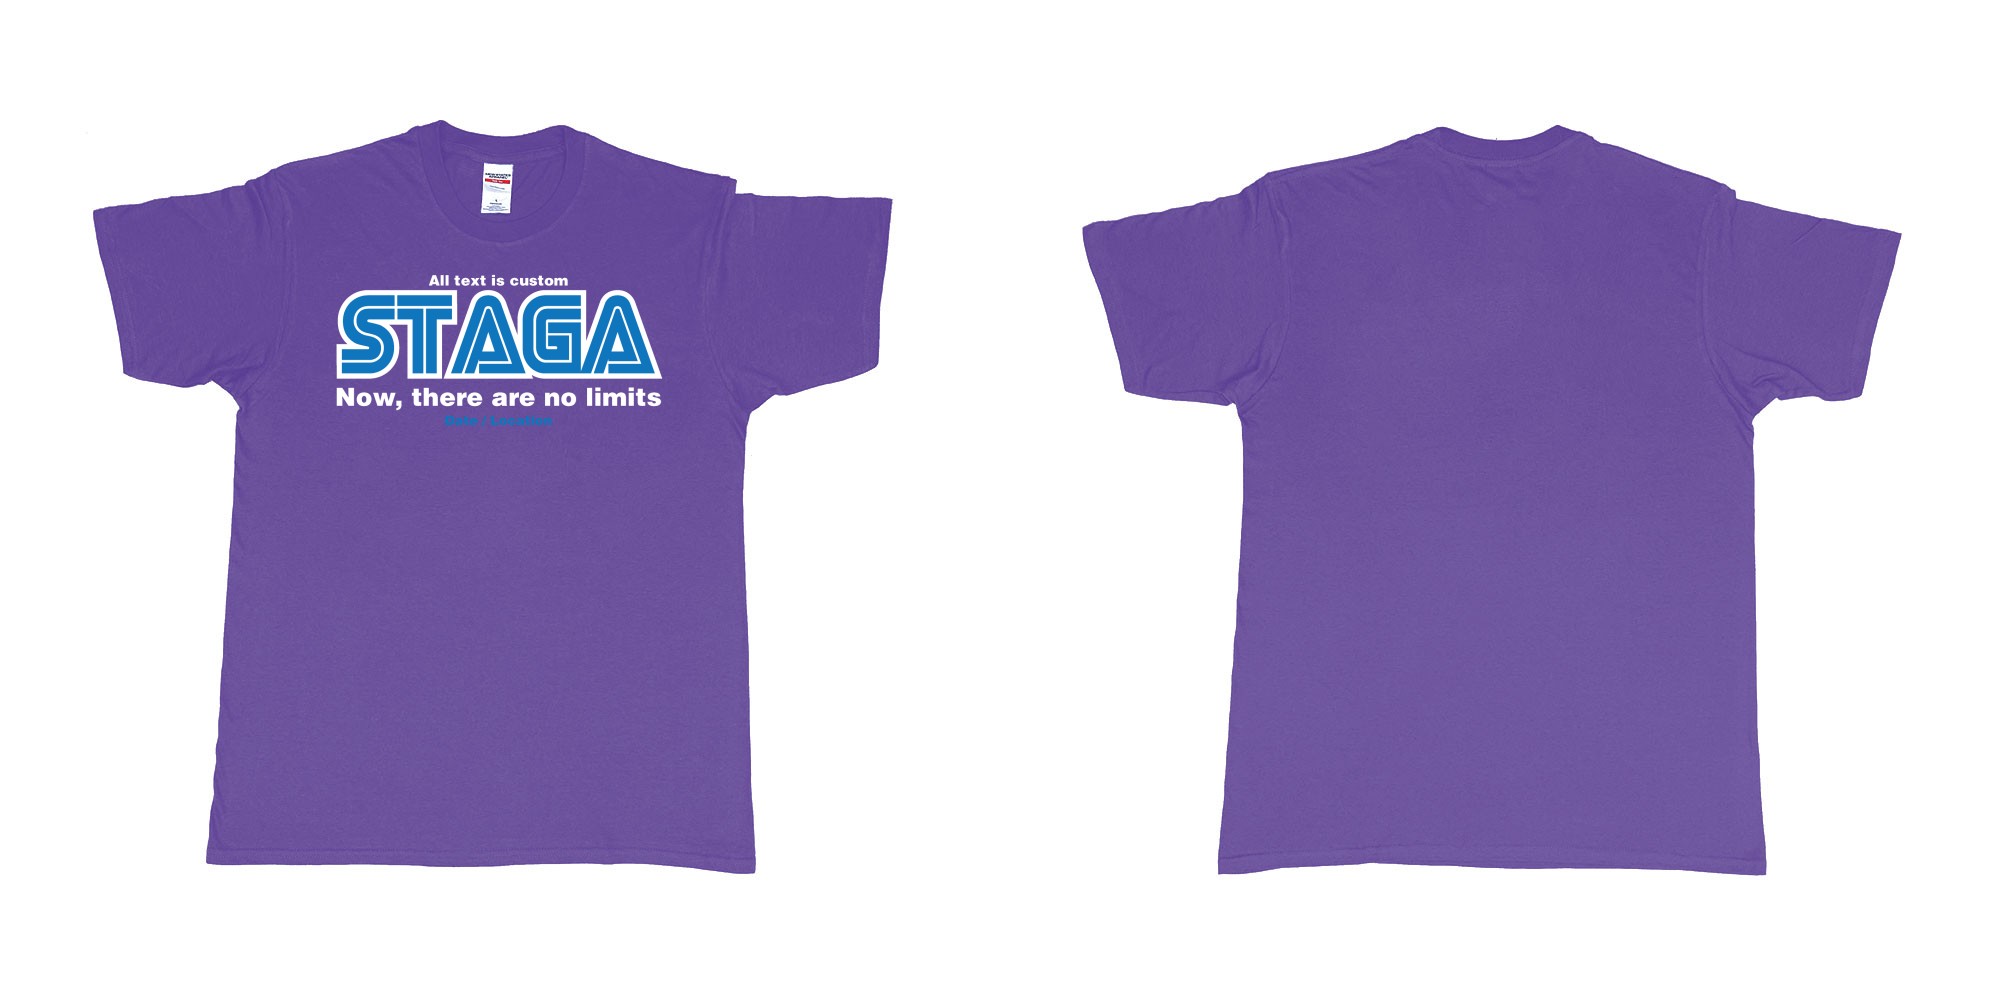 Custom tshirt design sega now there are no limits stag custom tshirt print in fabric color purple choice your own text made in Bali by The Pirate Way